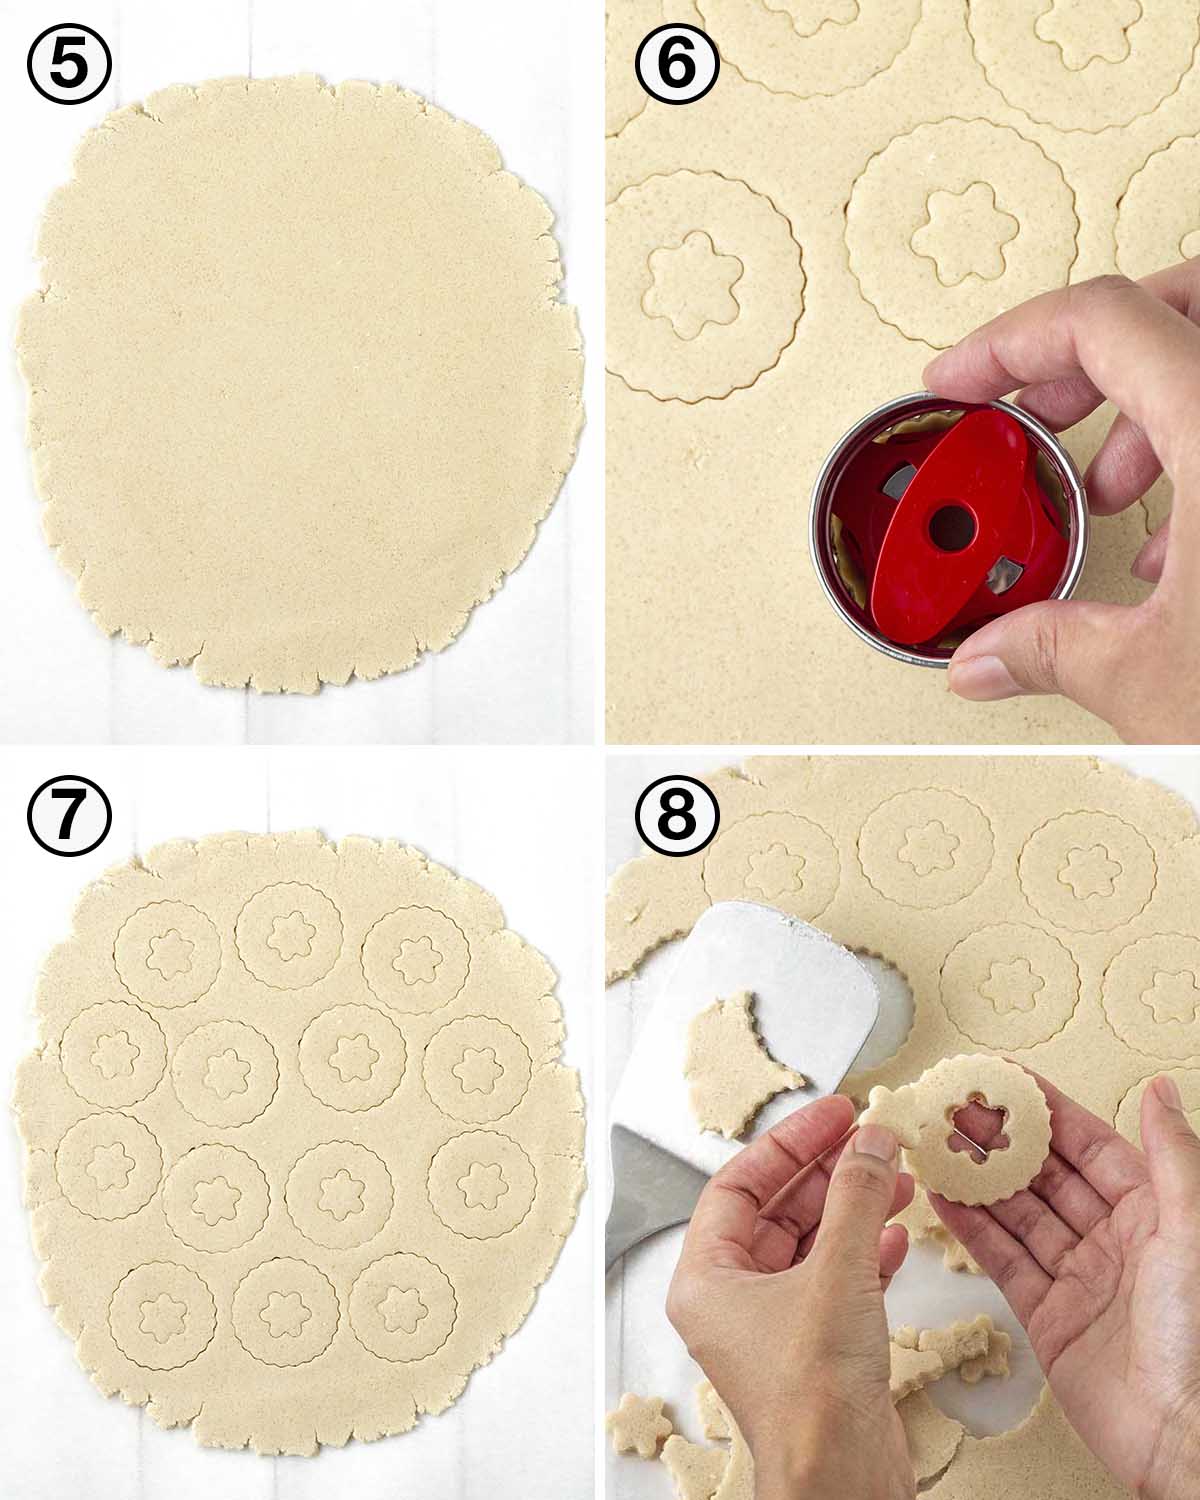 A collage of four images showing the second sequence of steps needed to make vegan gluten-free Linzer cookies.